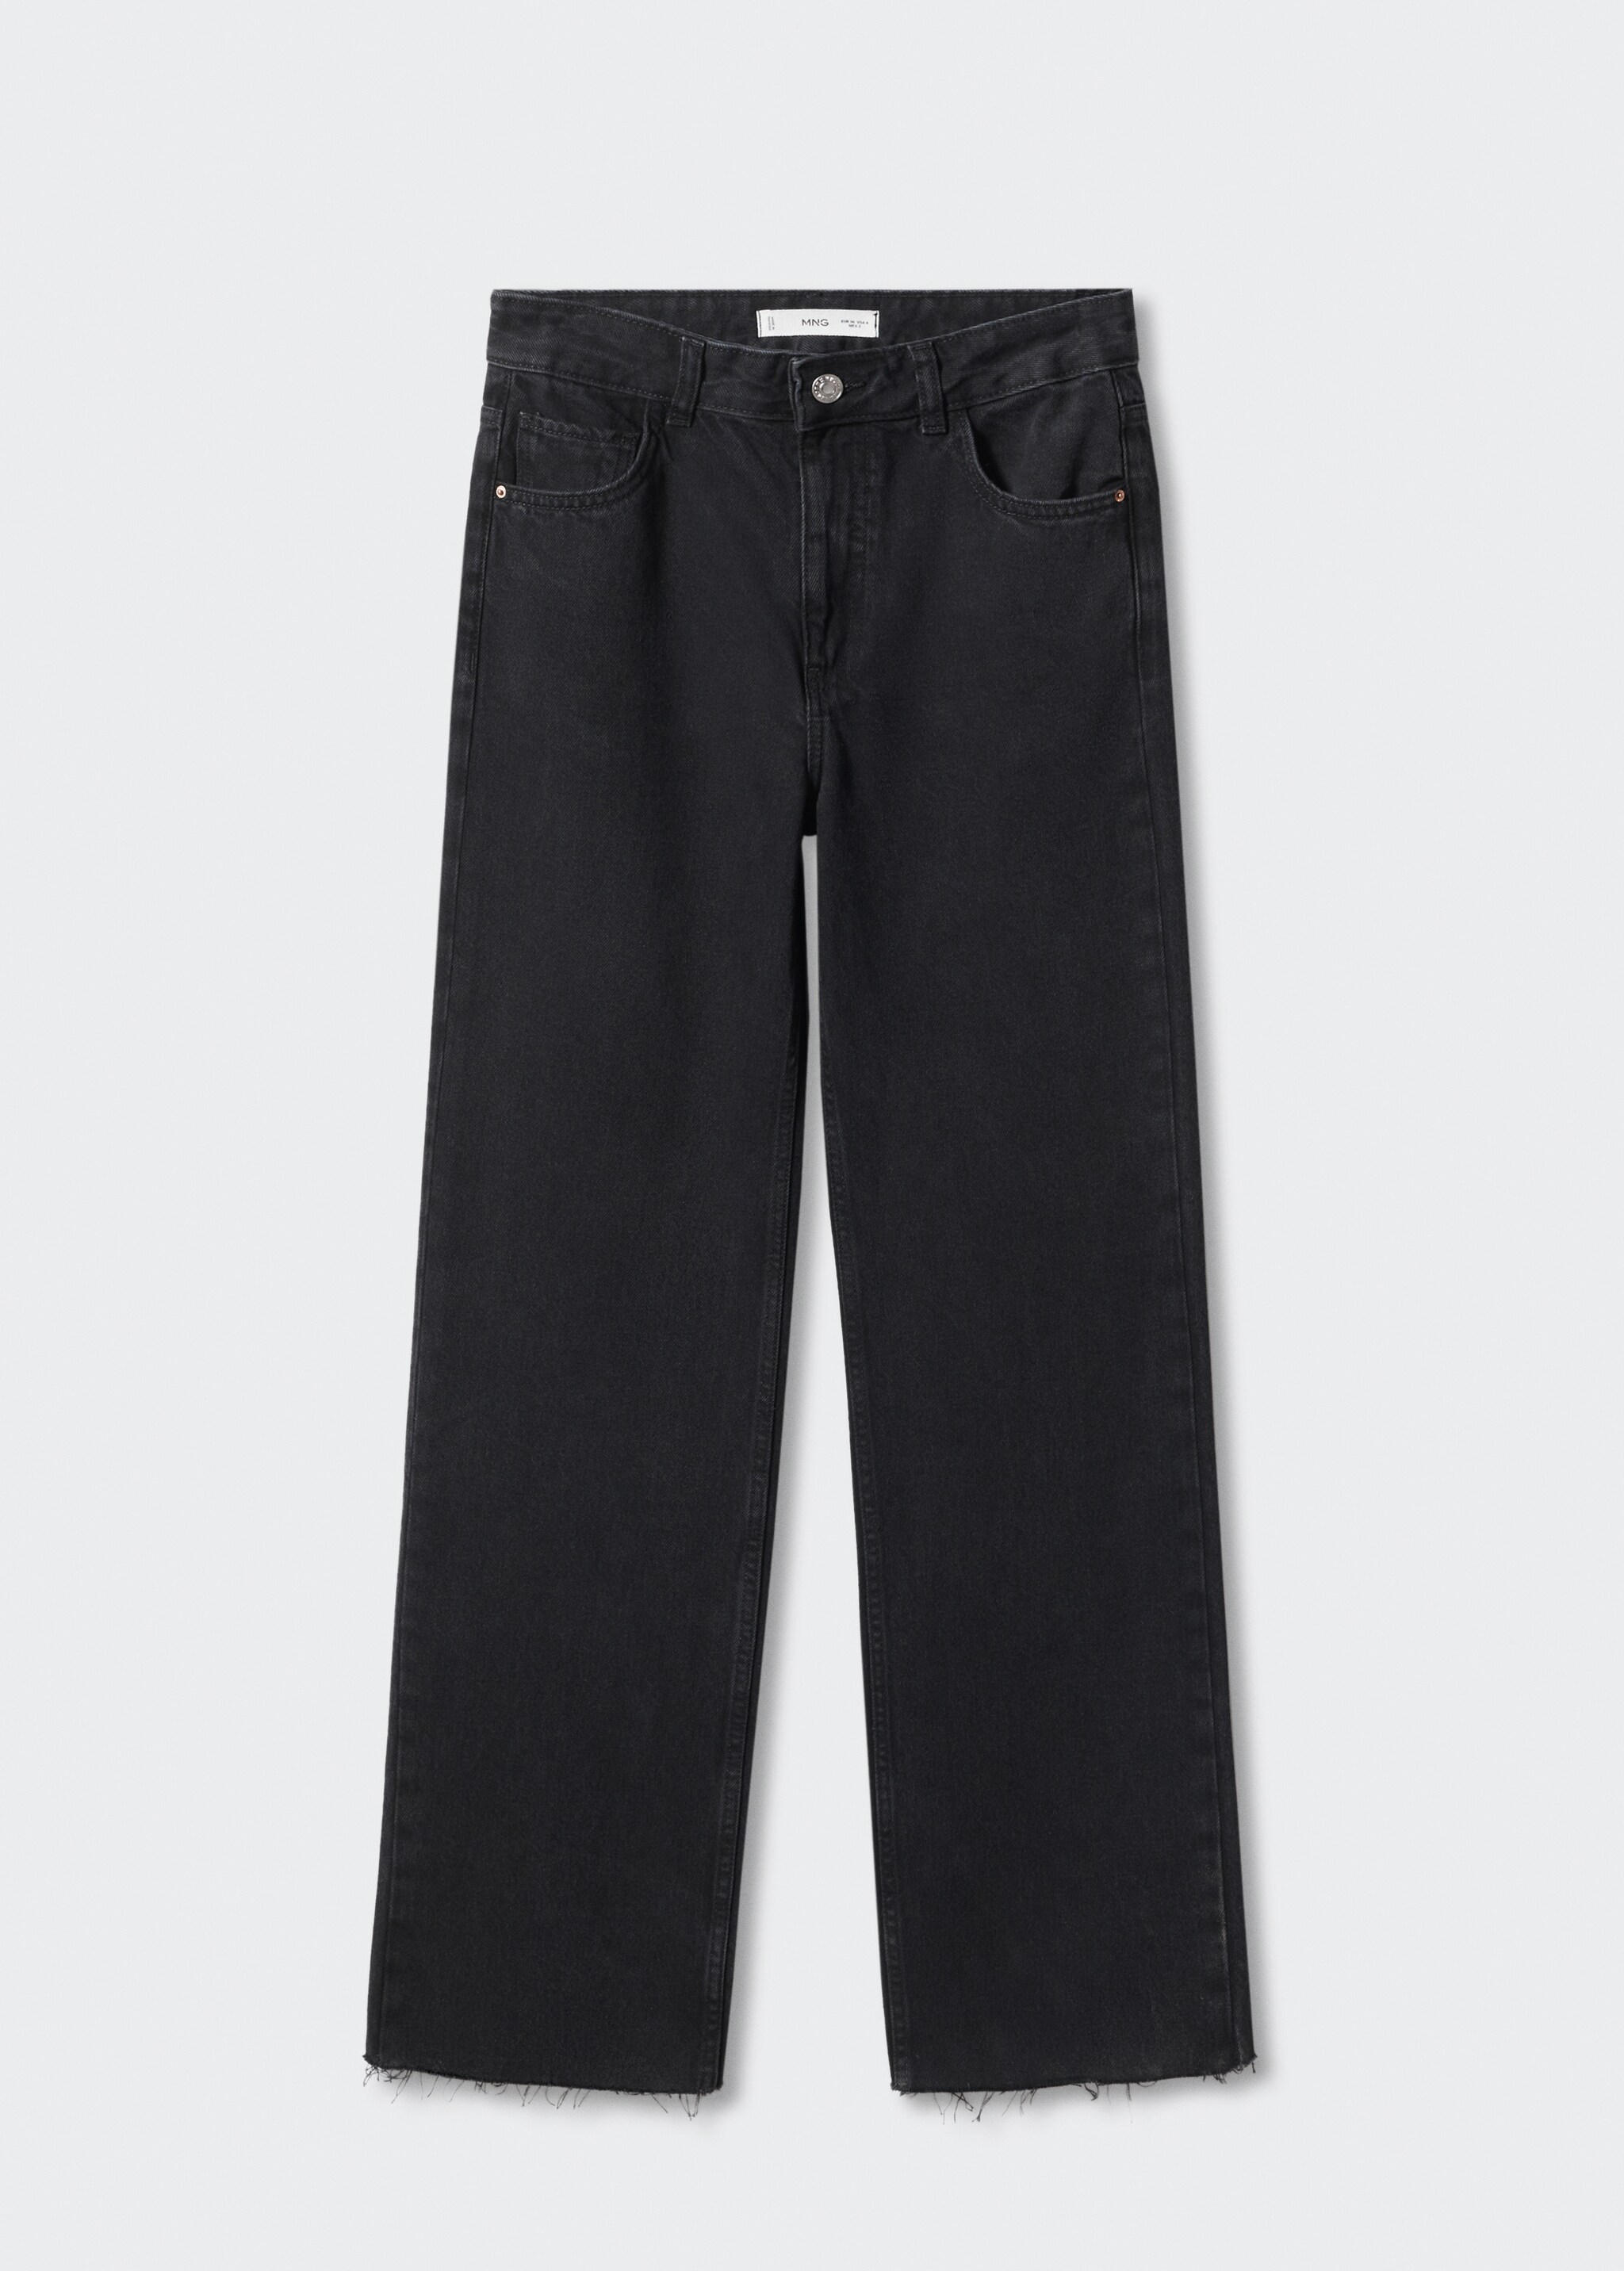 Wideleg mid-rise jeans - Article without model